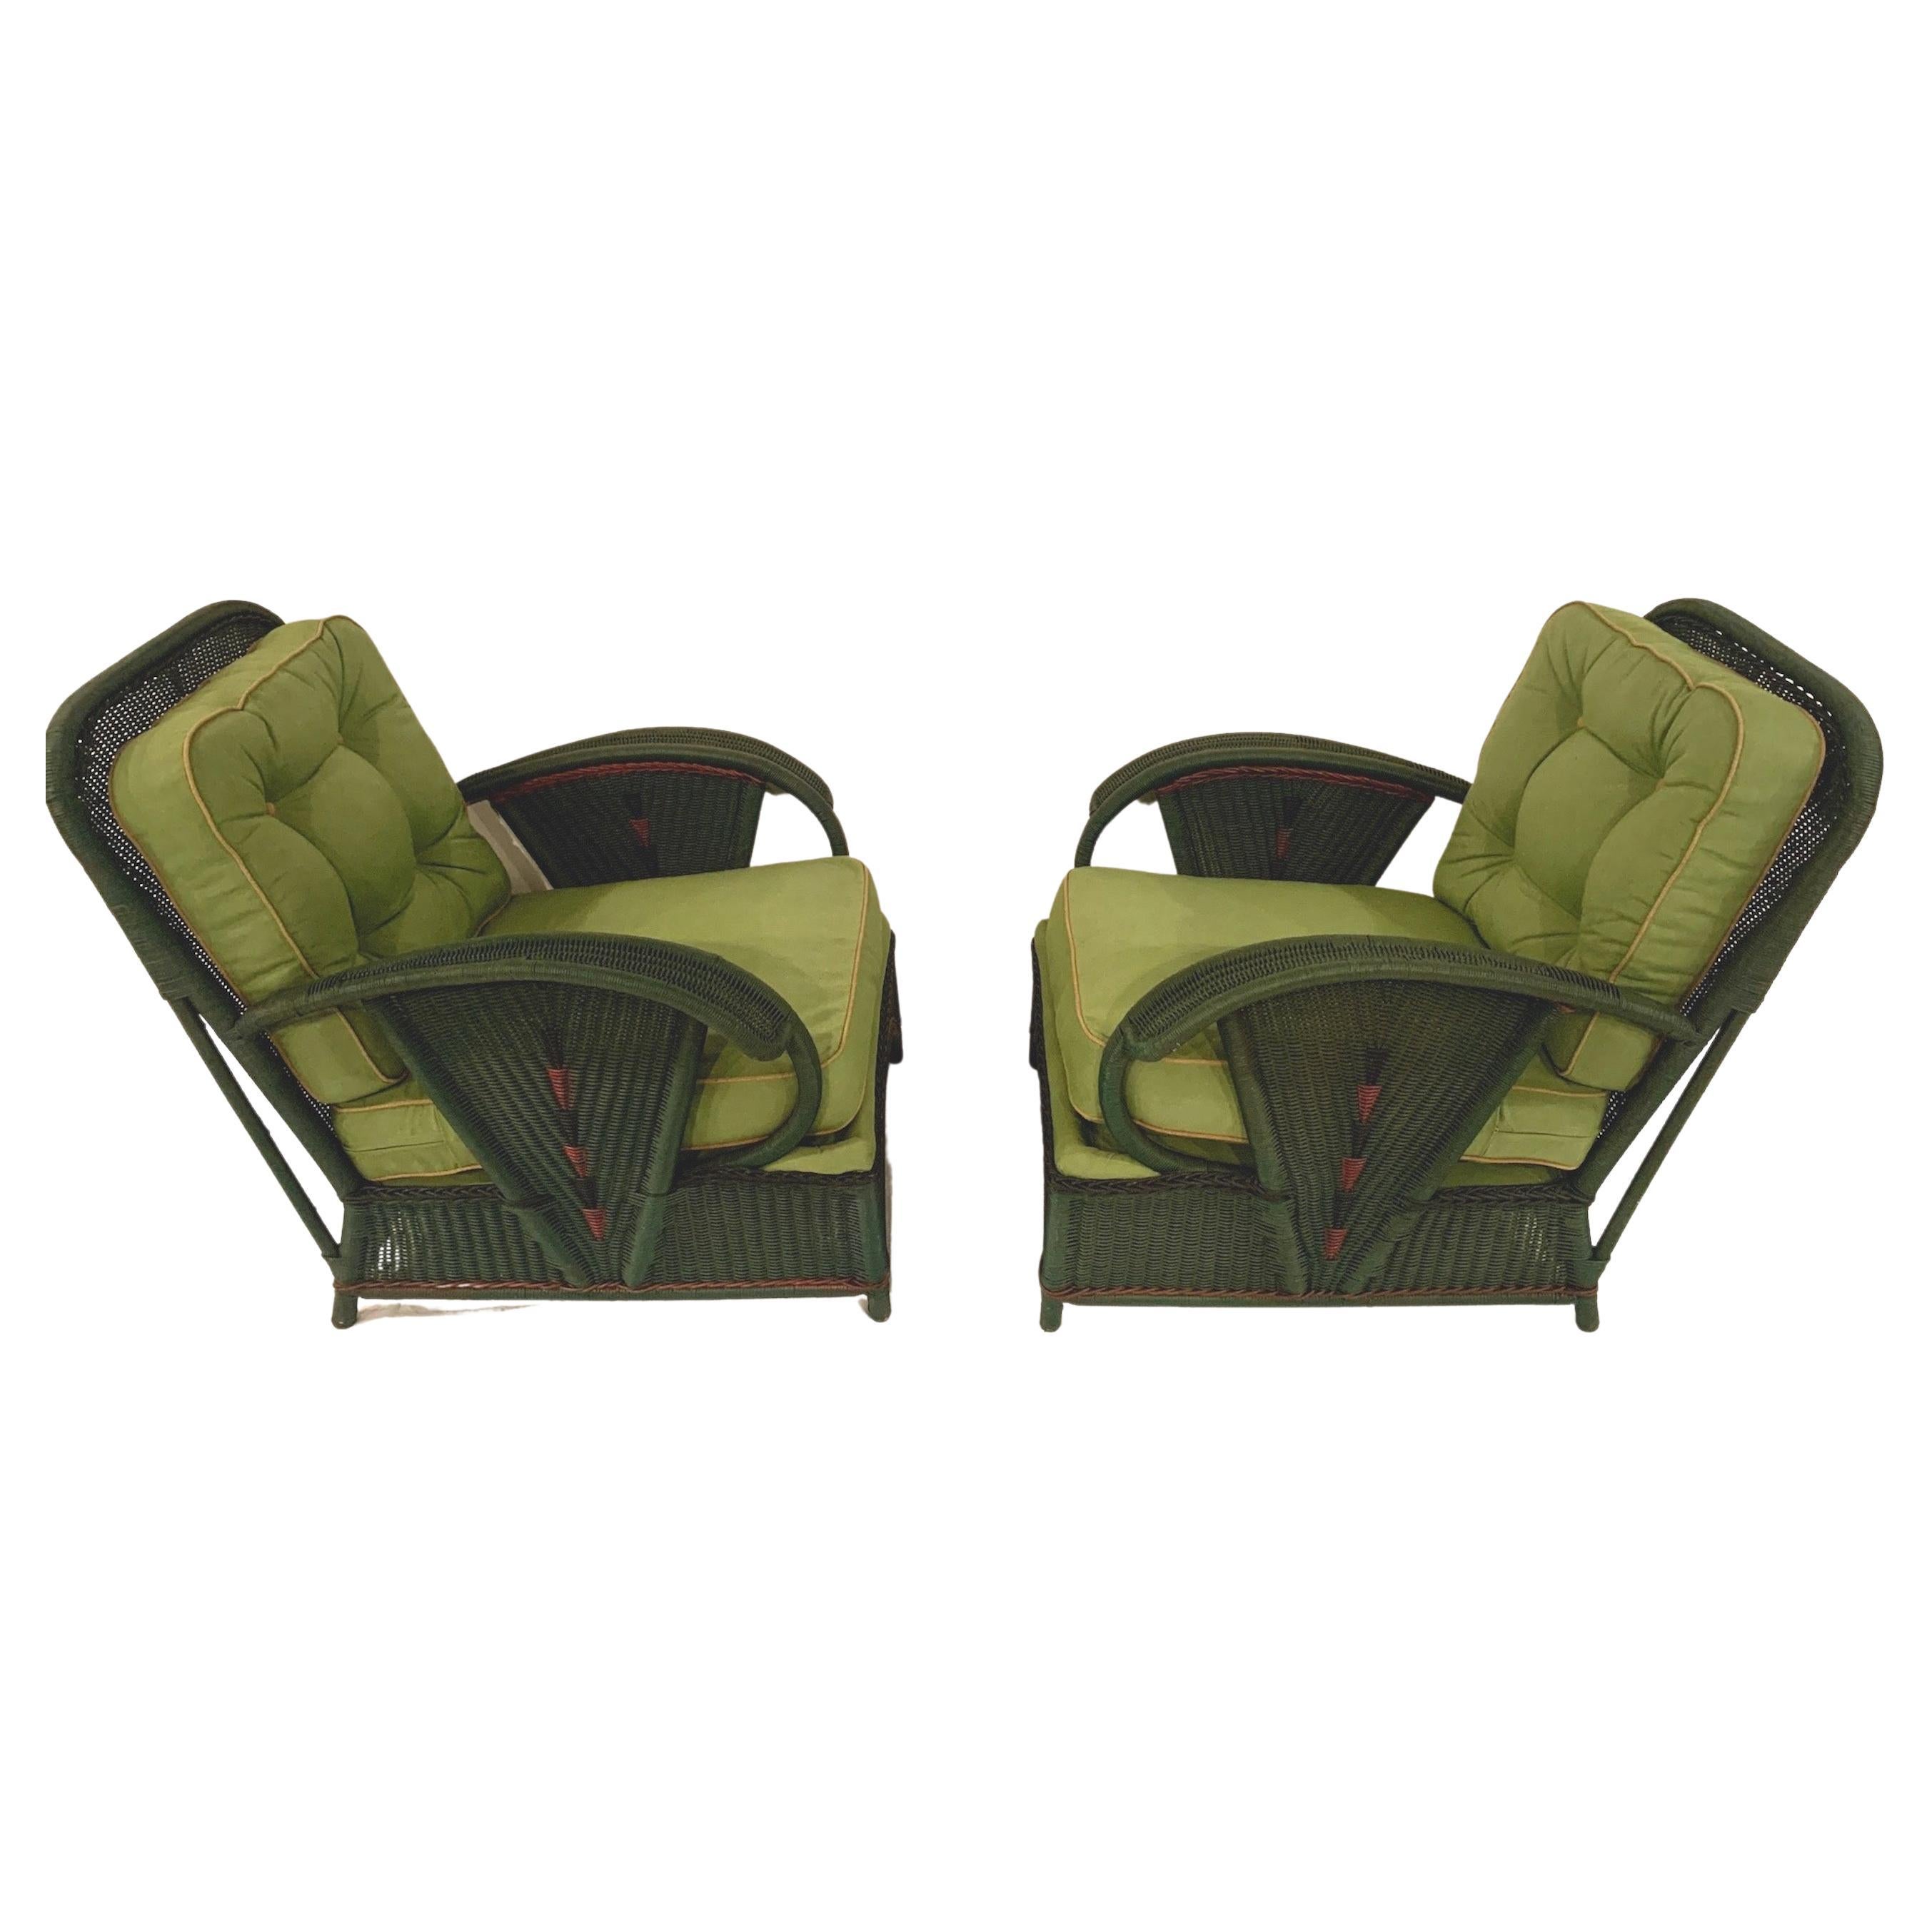 Pair of Green Antique Wicker Art Deco Lounge Chairs with Decorative Trim